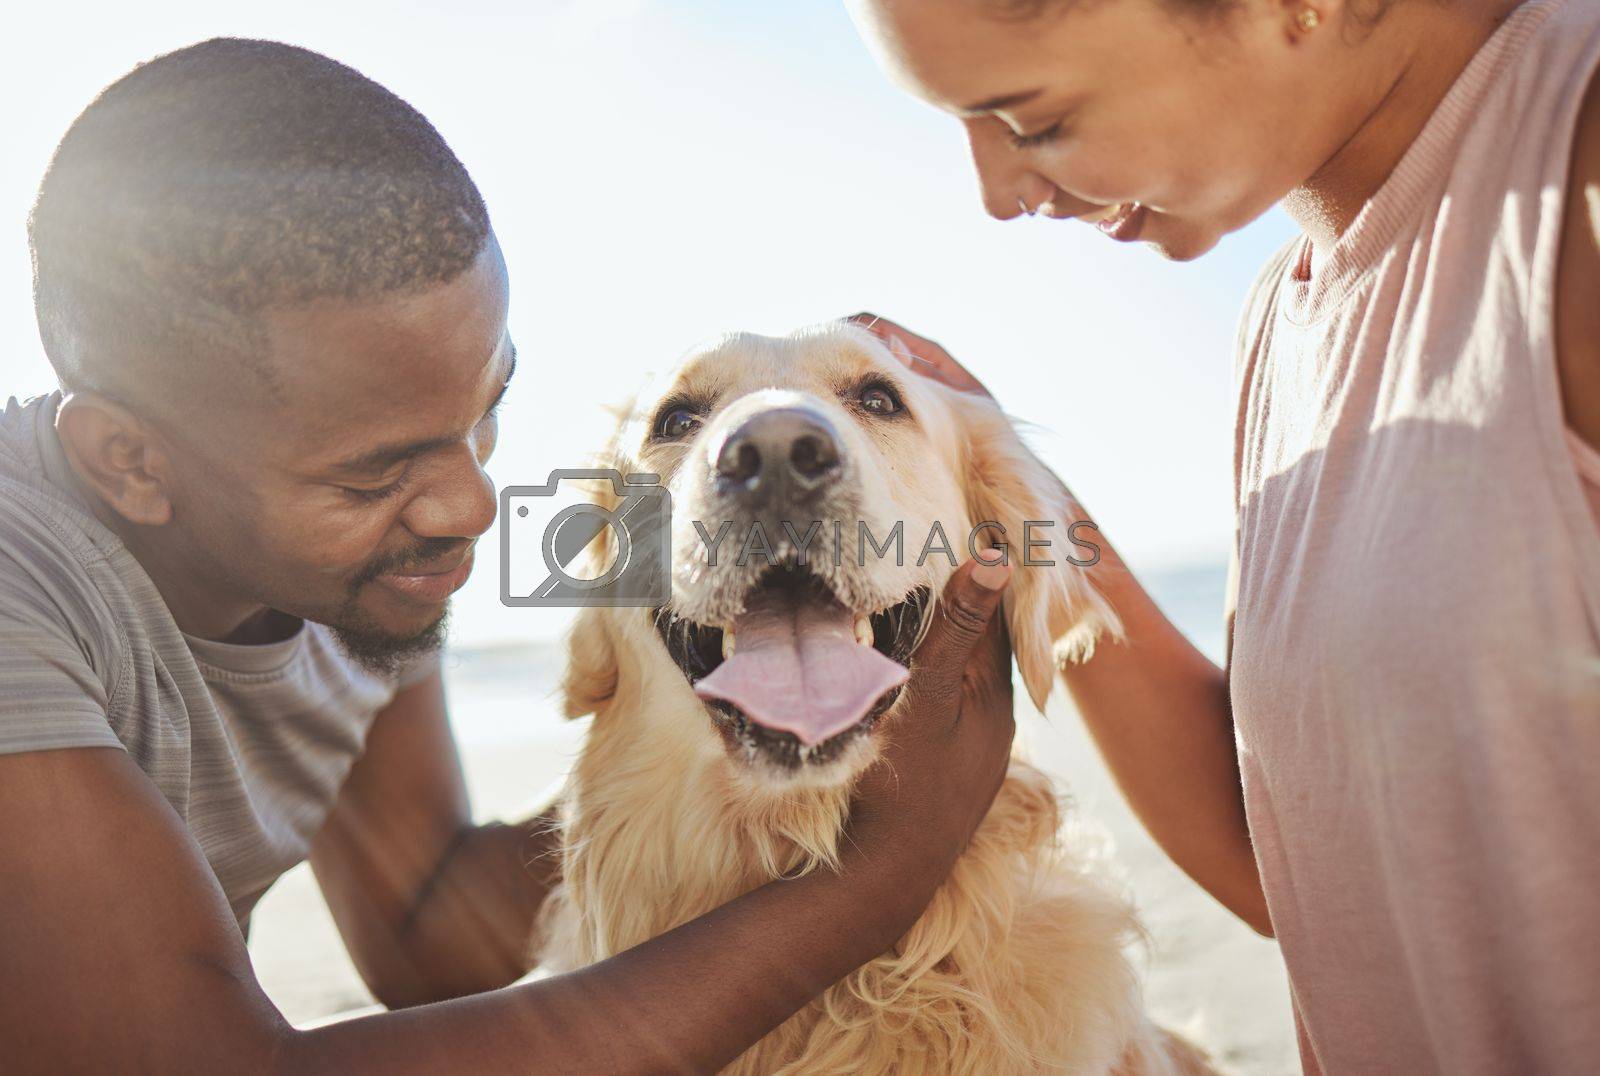 Royalty free image of Couple, dog and love, together at beach for fun trip, happy and pets animal with care. Bonding, spending quality time and black man with woman by the ocean on adventure with golden retriever puppy. by YuriArcurs